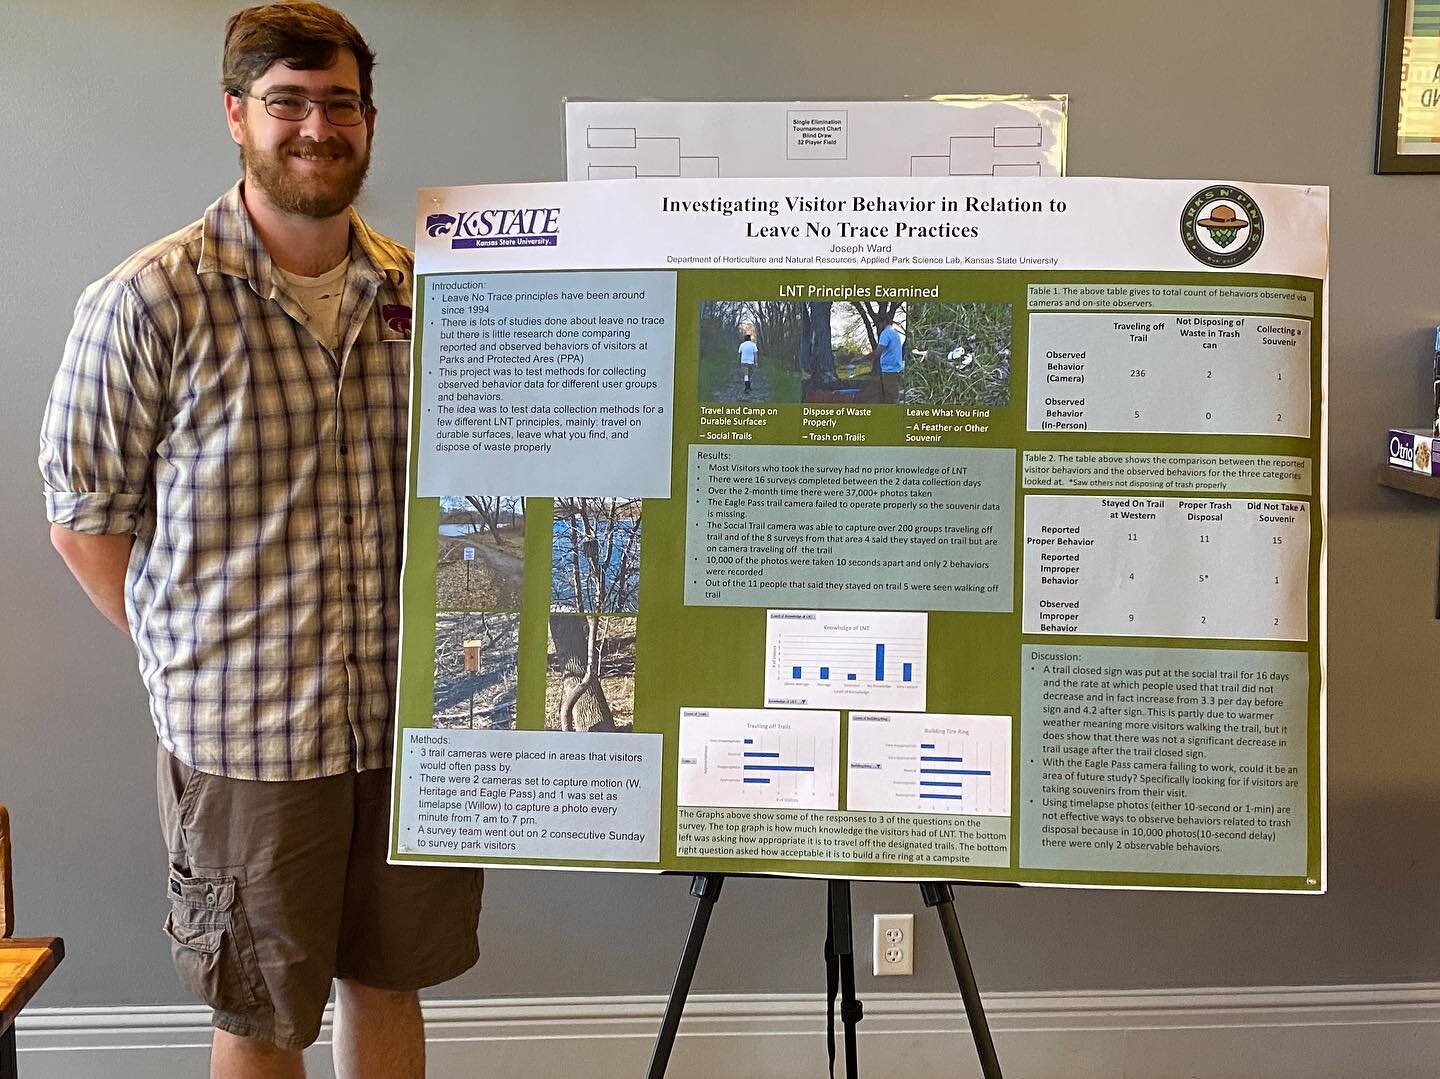 Our first Parks n&rsquo; Pints grant recipient, Joseph Ward, presented some of his findings today at @manhattanbrewing. Joe looked into how to better understand Leave No Trace behaviors. In his pilot study, he found that visitors to a state park ofte